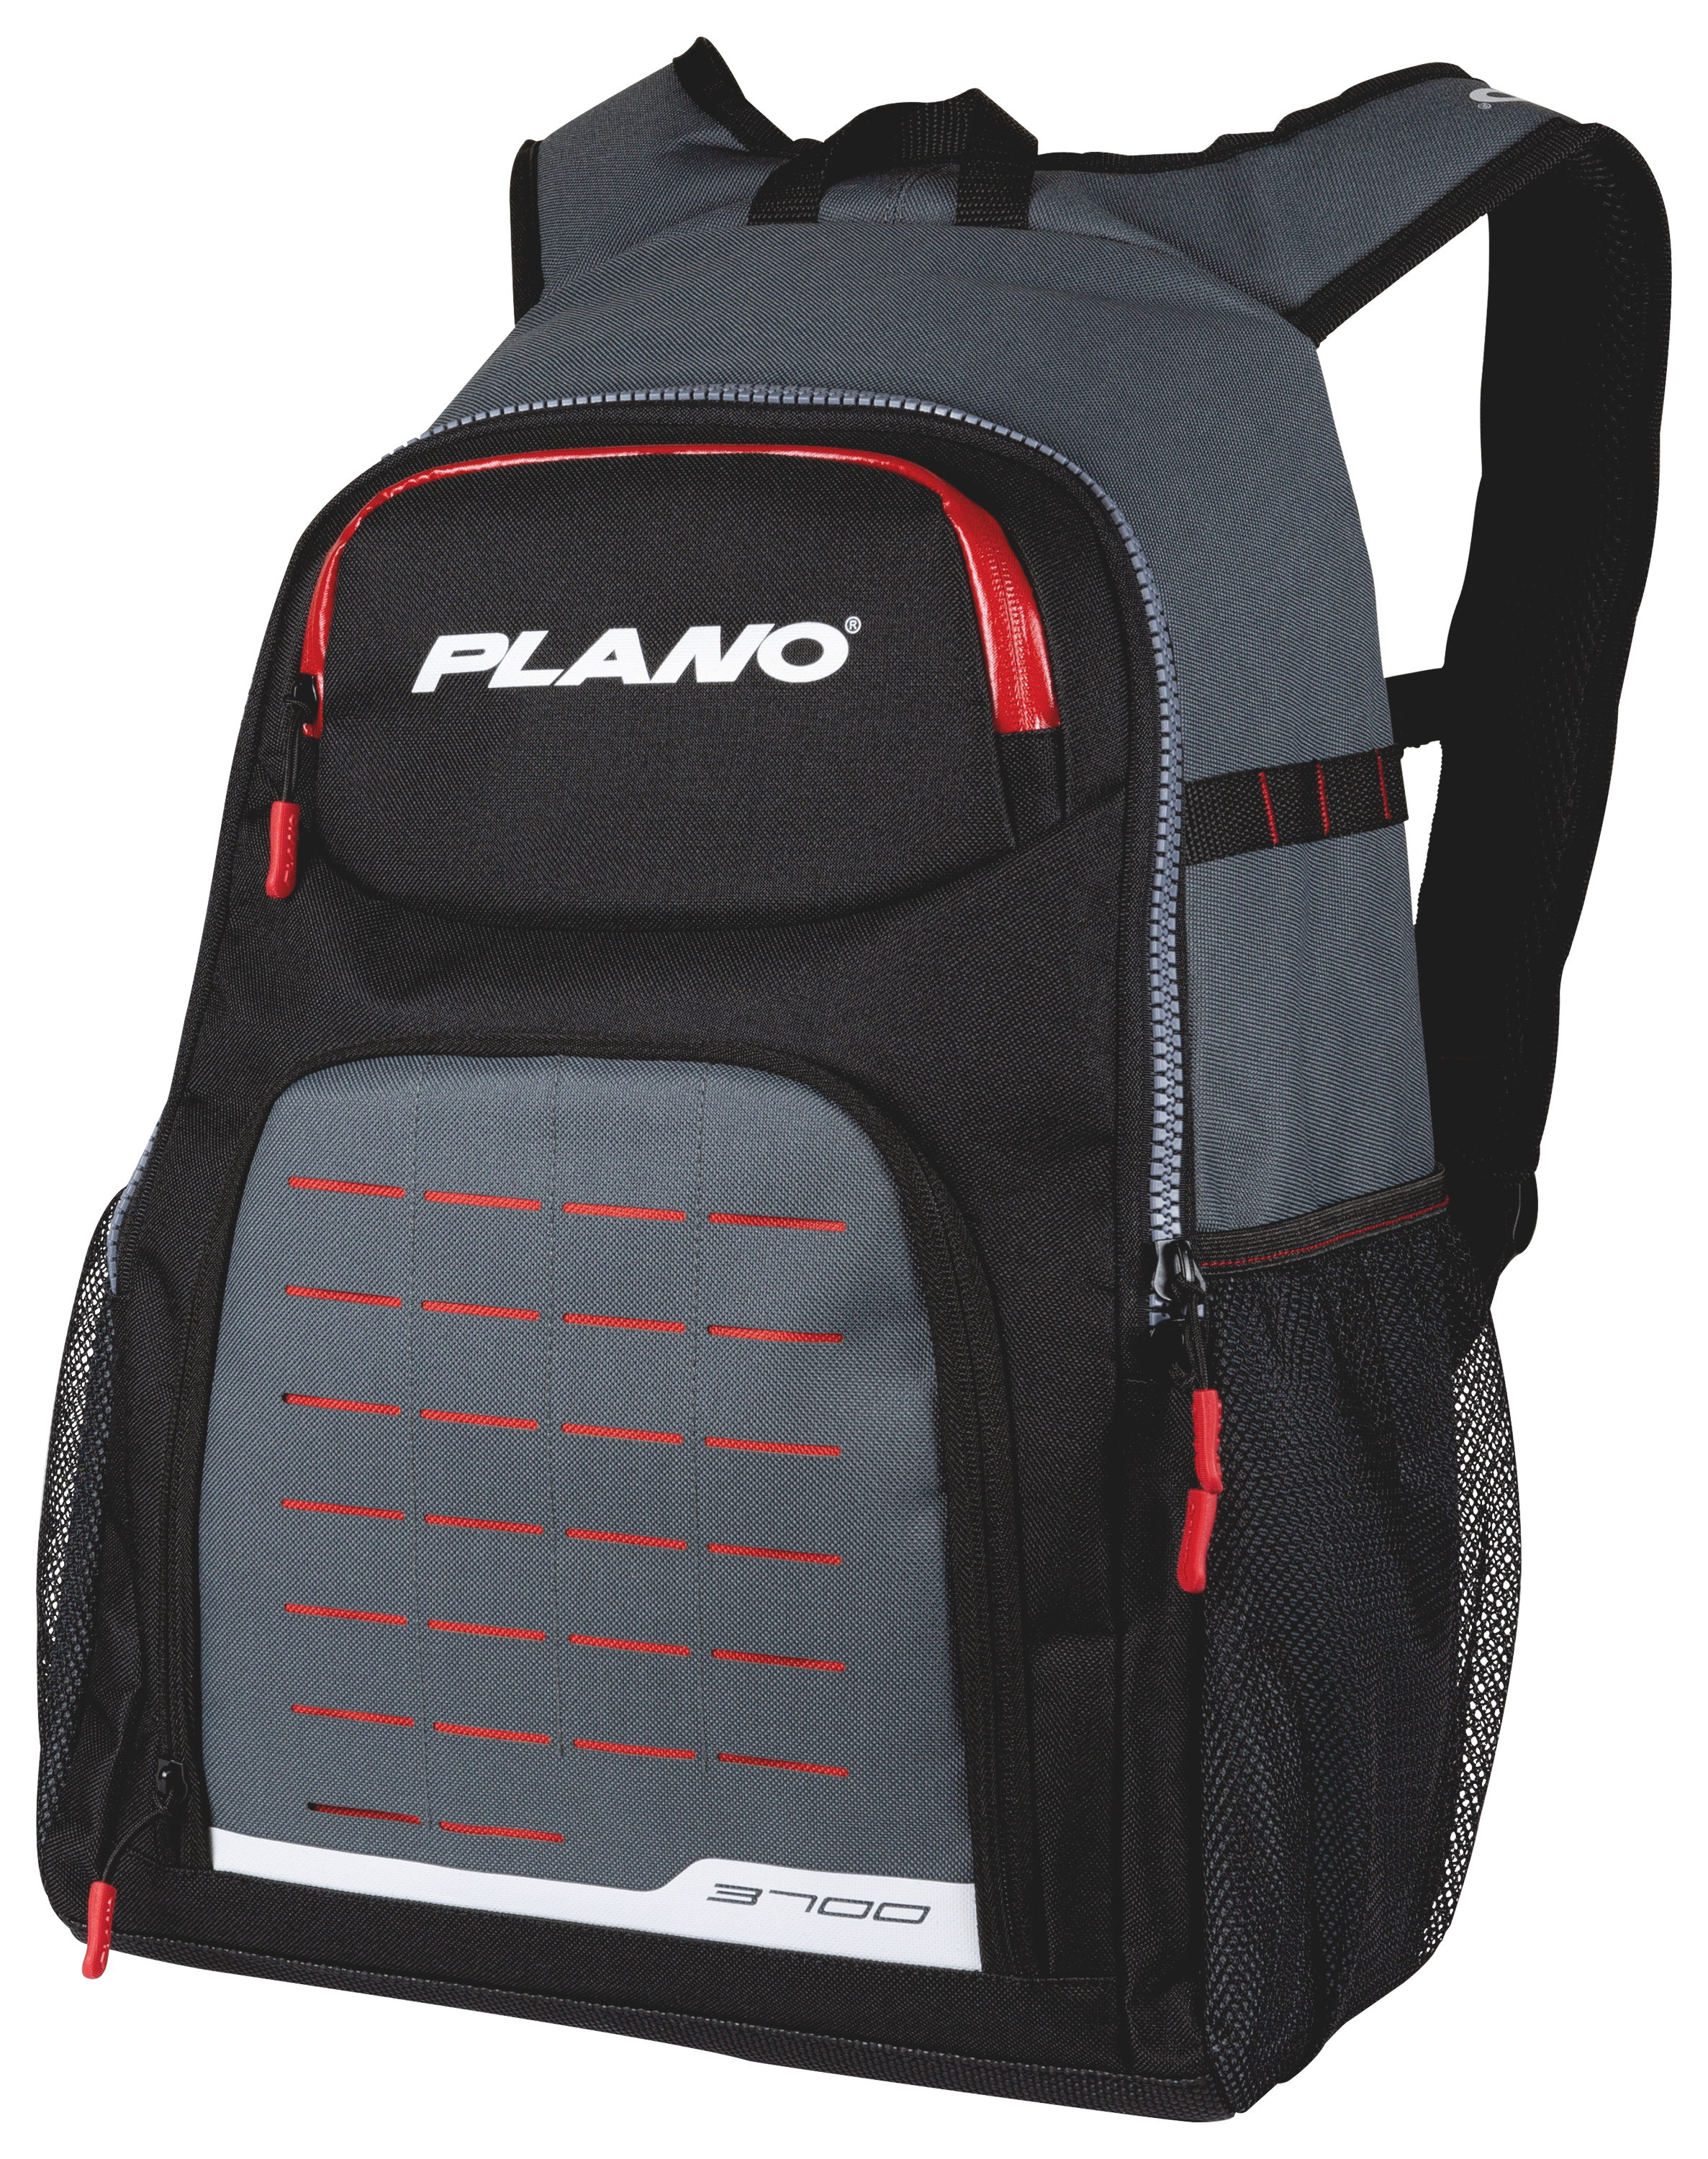 Plano Atlas 3700 Tackle Fishing Backpack, Gray EVA Material, Includes 3  3750 StowAway Utility Boxes for Worms, Lures, & Baits, Waterproof &  Non-Skid